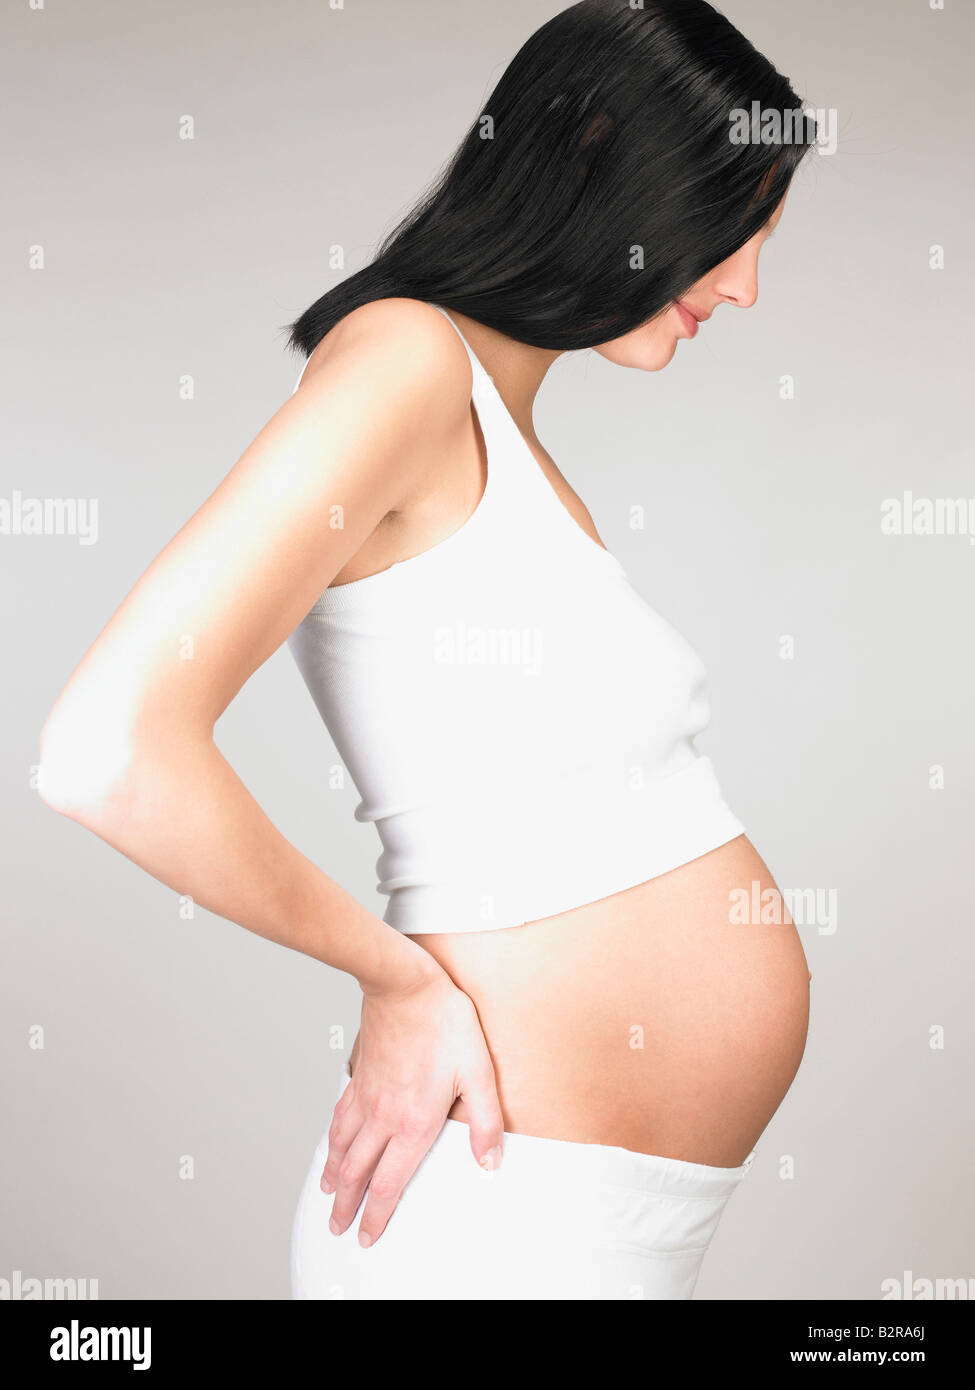 Pregnant woman touching her stomach Stock Photo